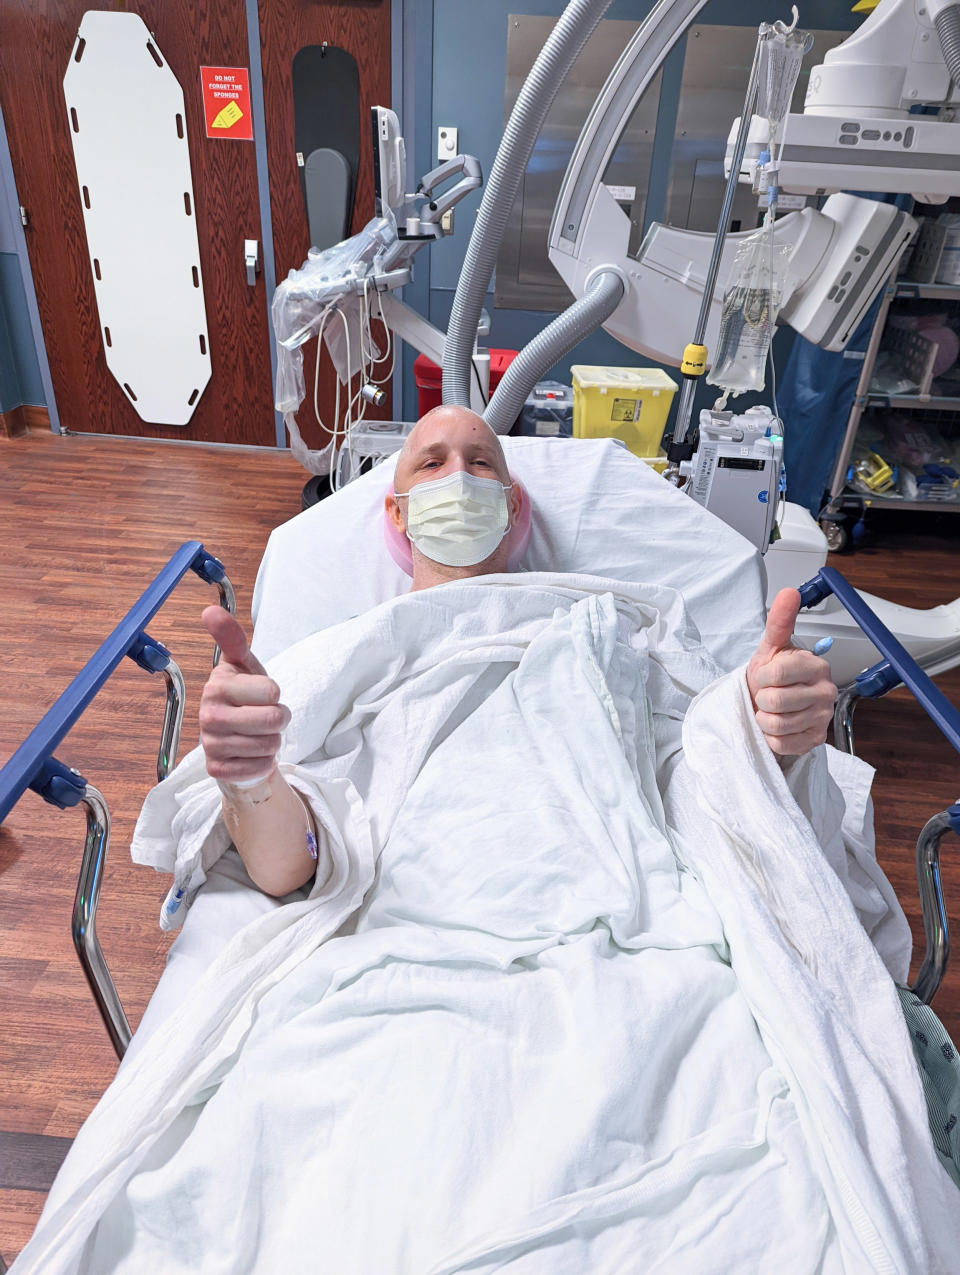 Jay Keller giving thumbs up in a hospital bed. (Courtesy Northwestern Medicine)